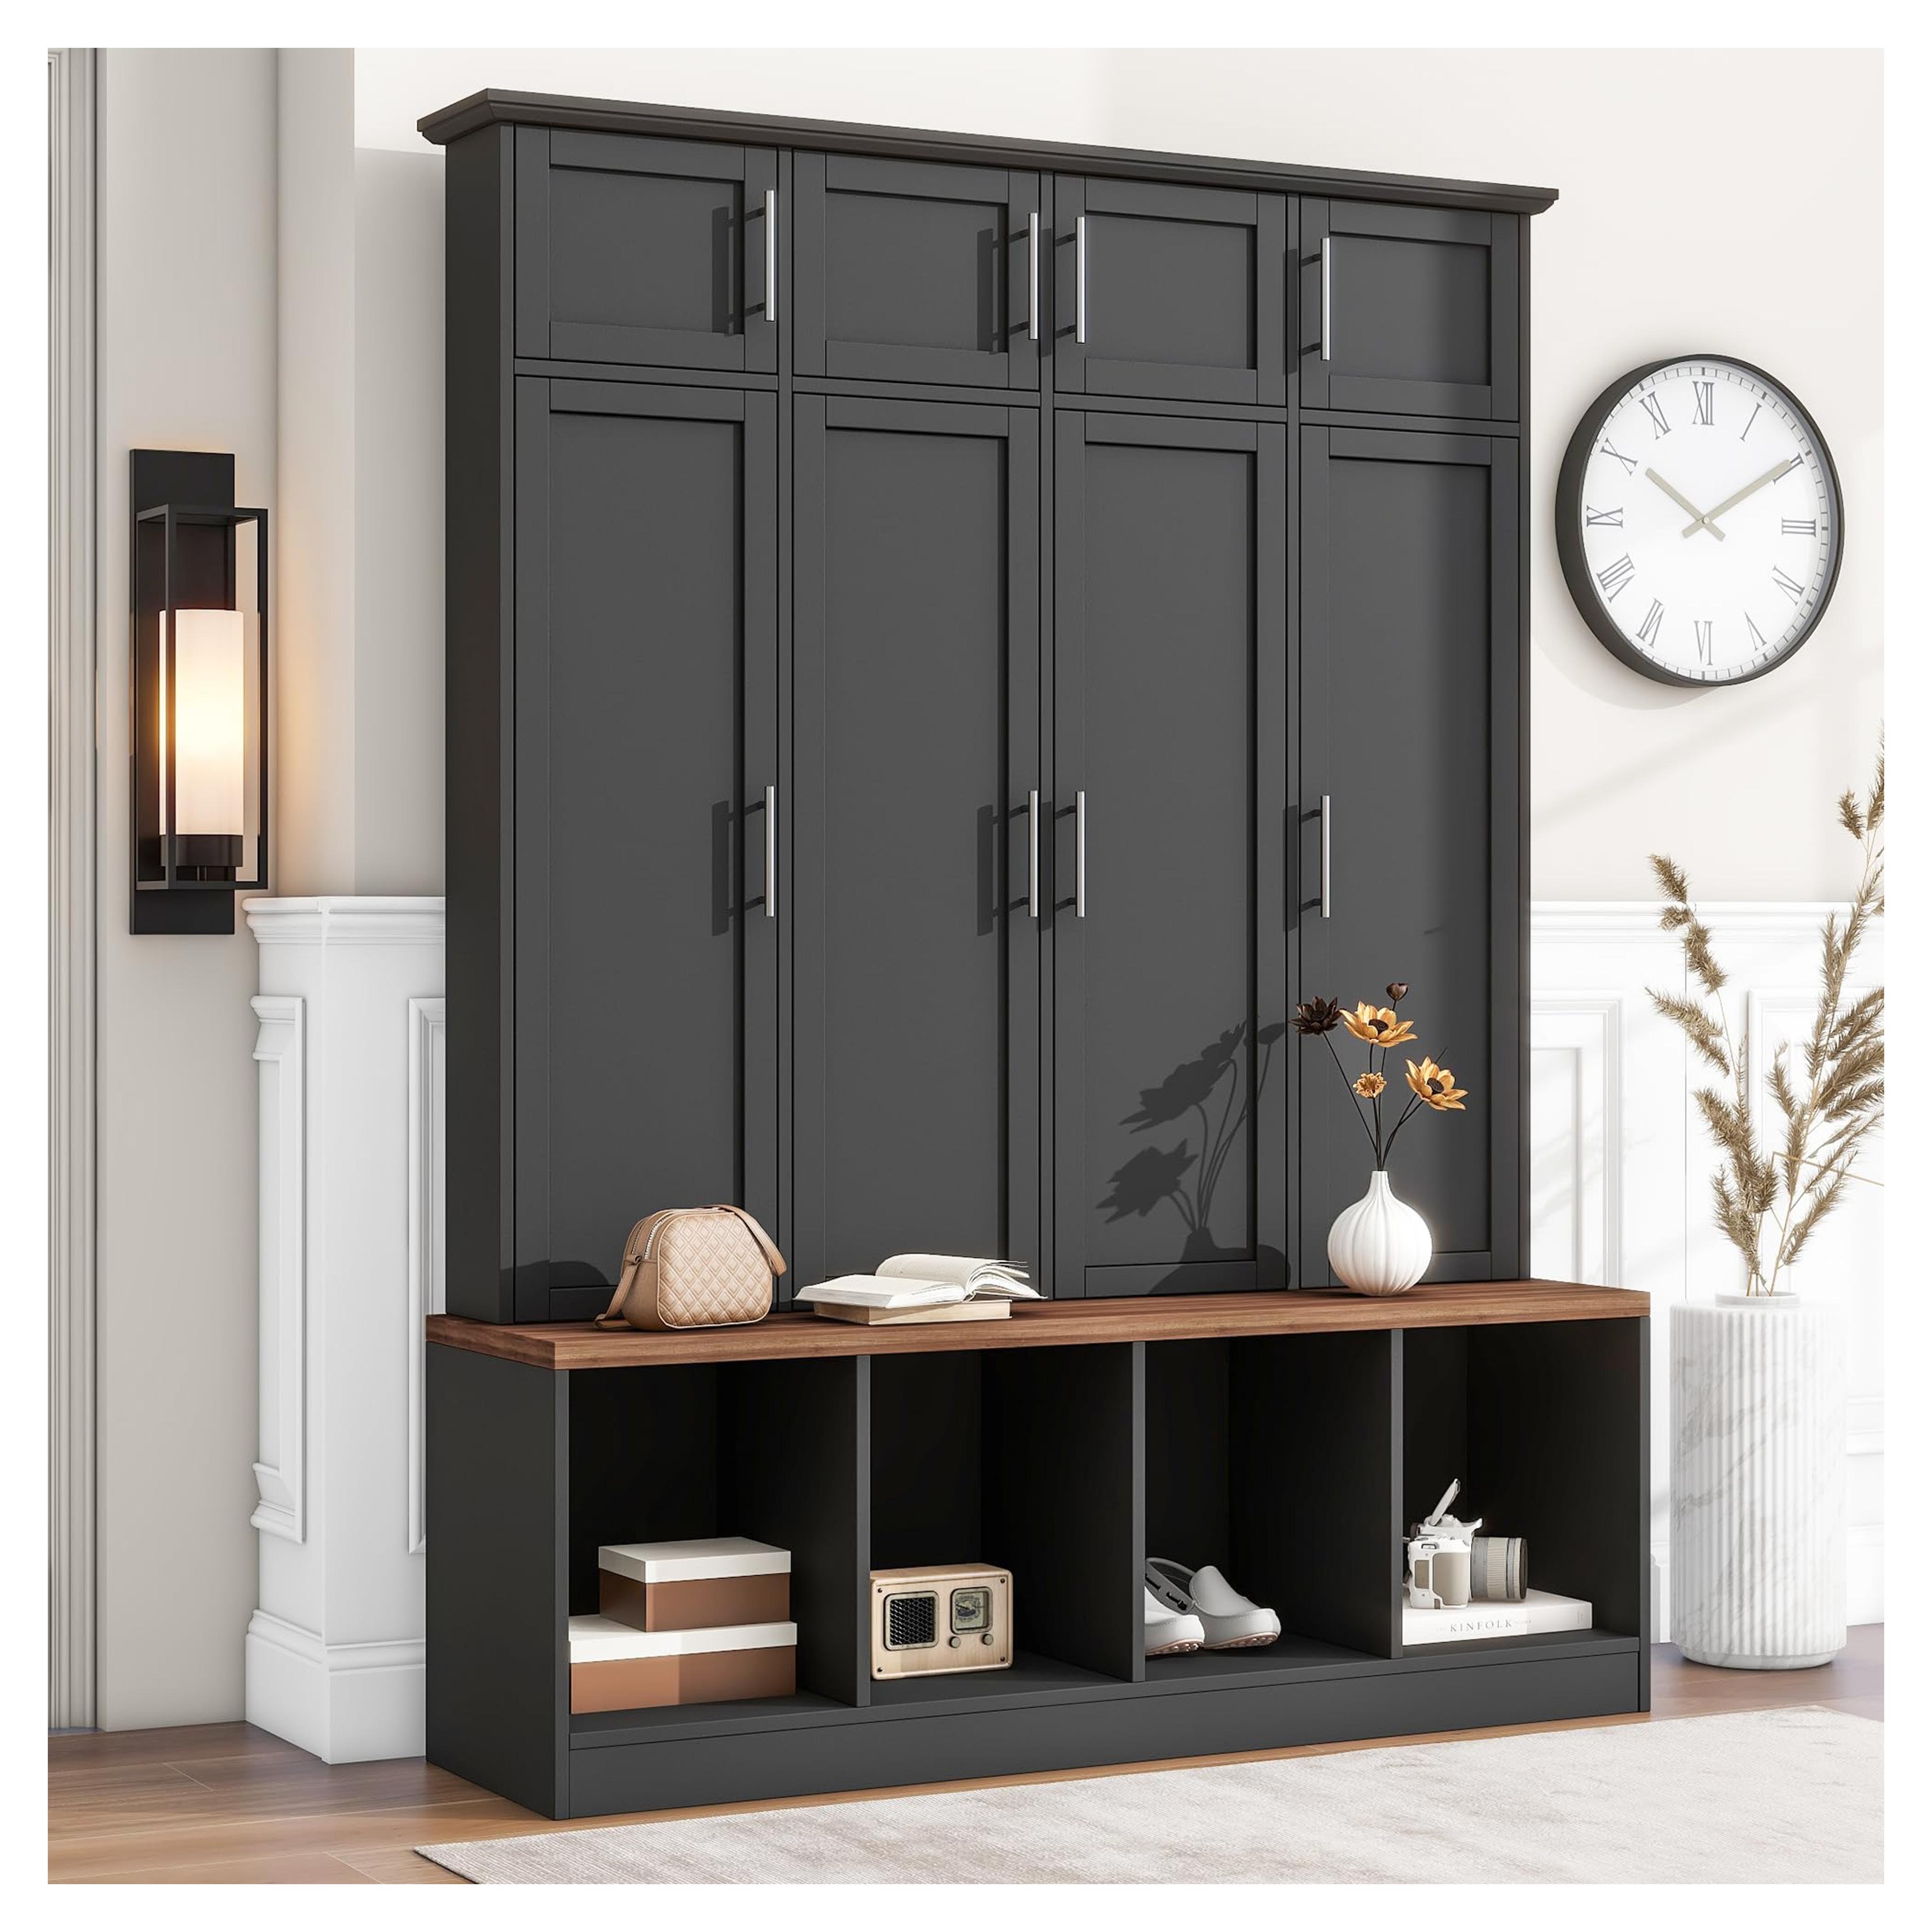 Amazon.com: Multi-Functional 59'' Wide Hall Tree with 4 Hidden Hanging Hooks, Brown Wood Grain Minimalist Shoe Cabinet, Entryway Cabinet Coat Hanger with Open Compartments for Living Room Hallway (Black-Hid) : Home & Kitchen